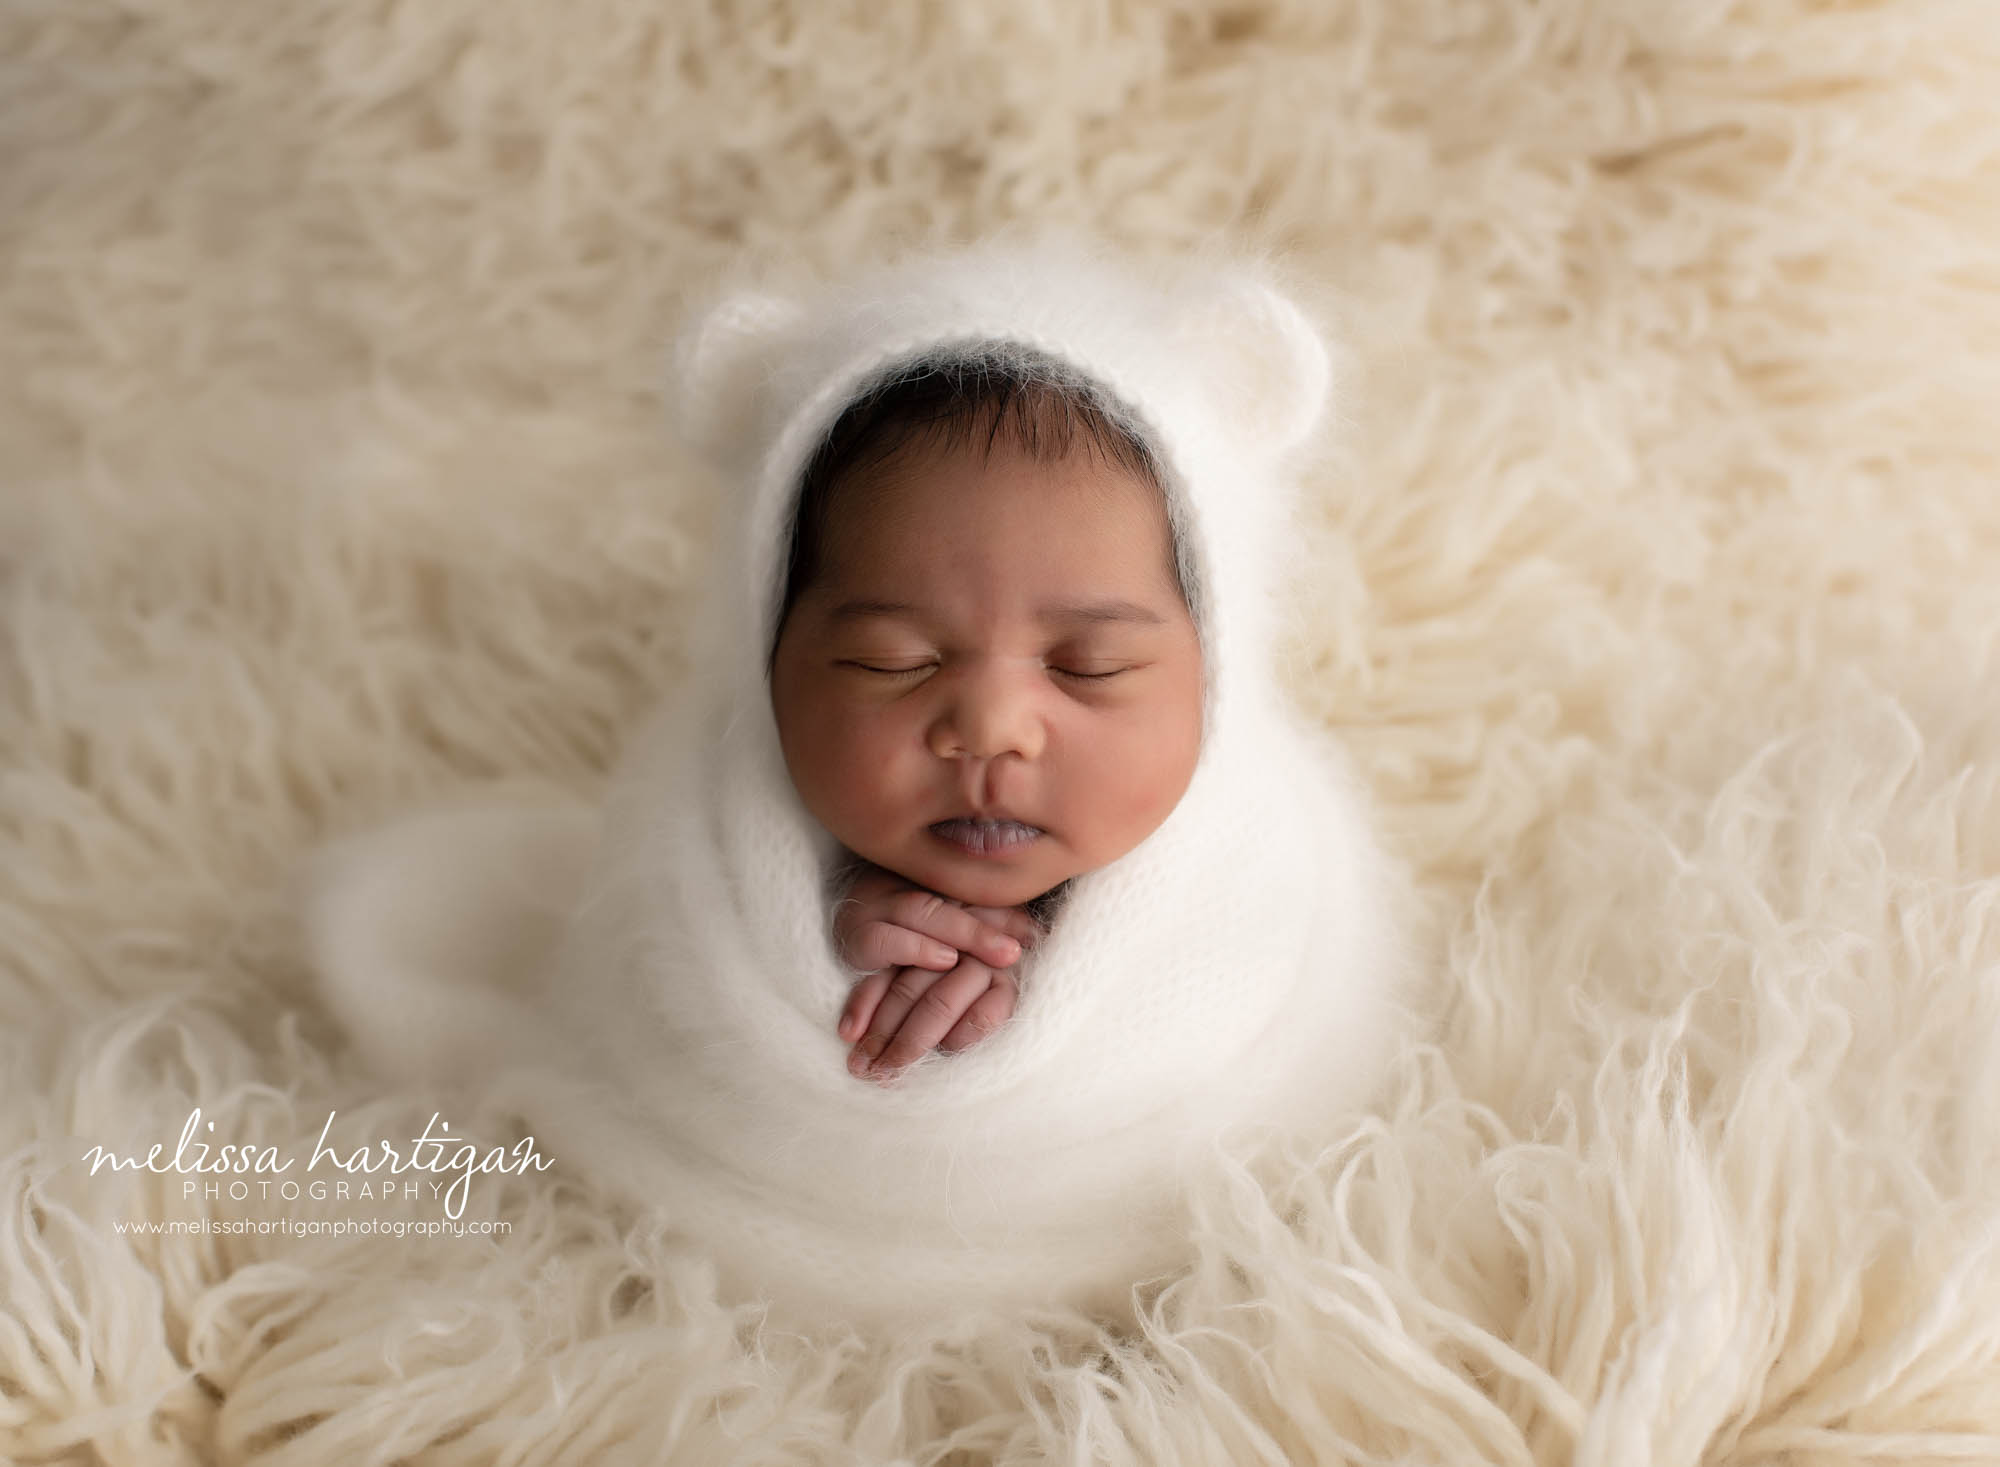 baby girl posed on cream colored flokati with white knitted bear bonnet and wrap